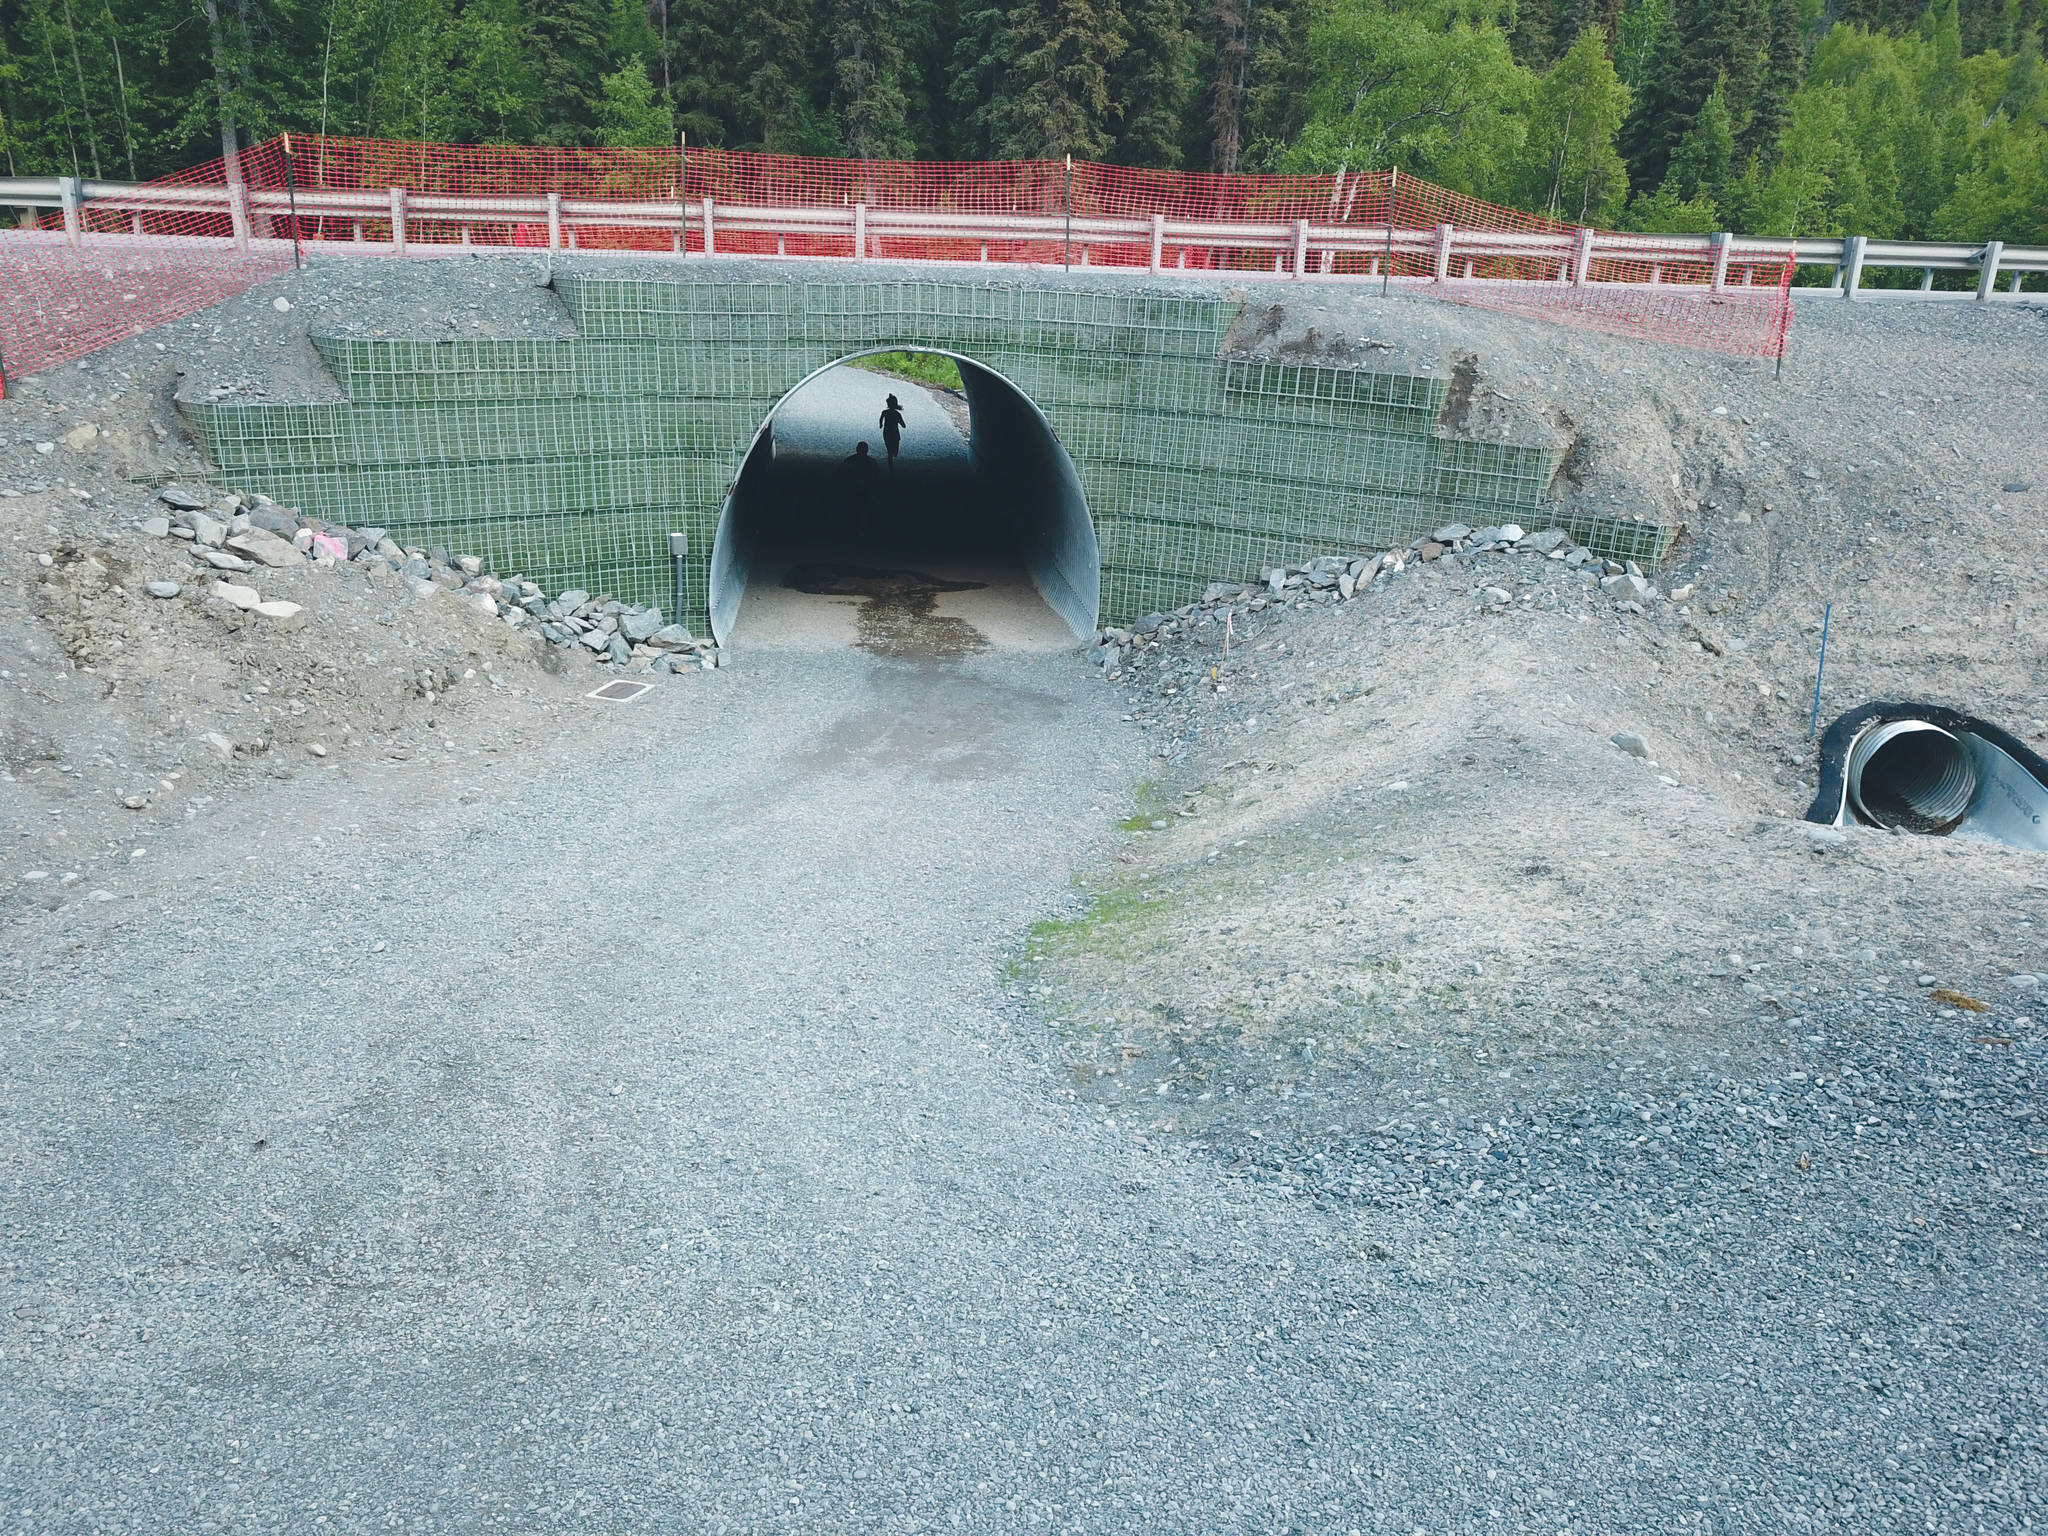 The underpass for the Skyline Trail, one of several improvements that were part of the Sterling Highway Mile 58 to 79 Improvements Project, provides a safe crossing for hikers. (Photo provided by Kenai National Wildlife Refuge)